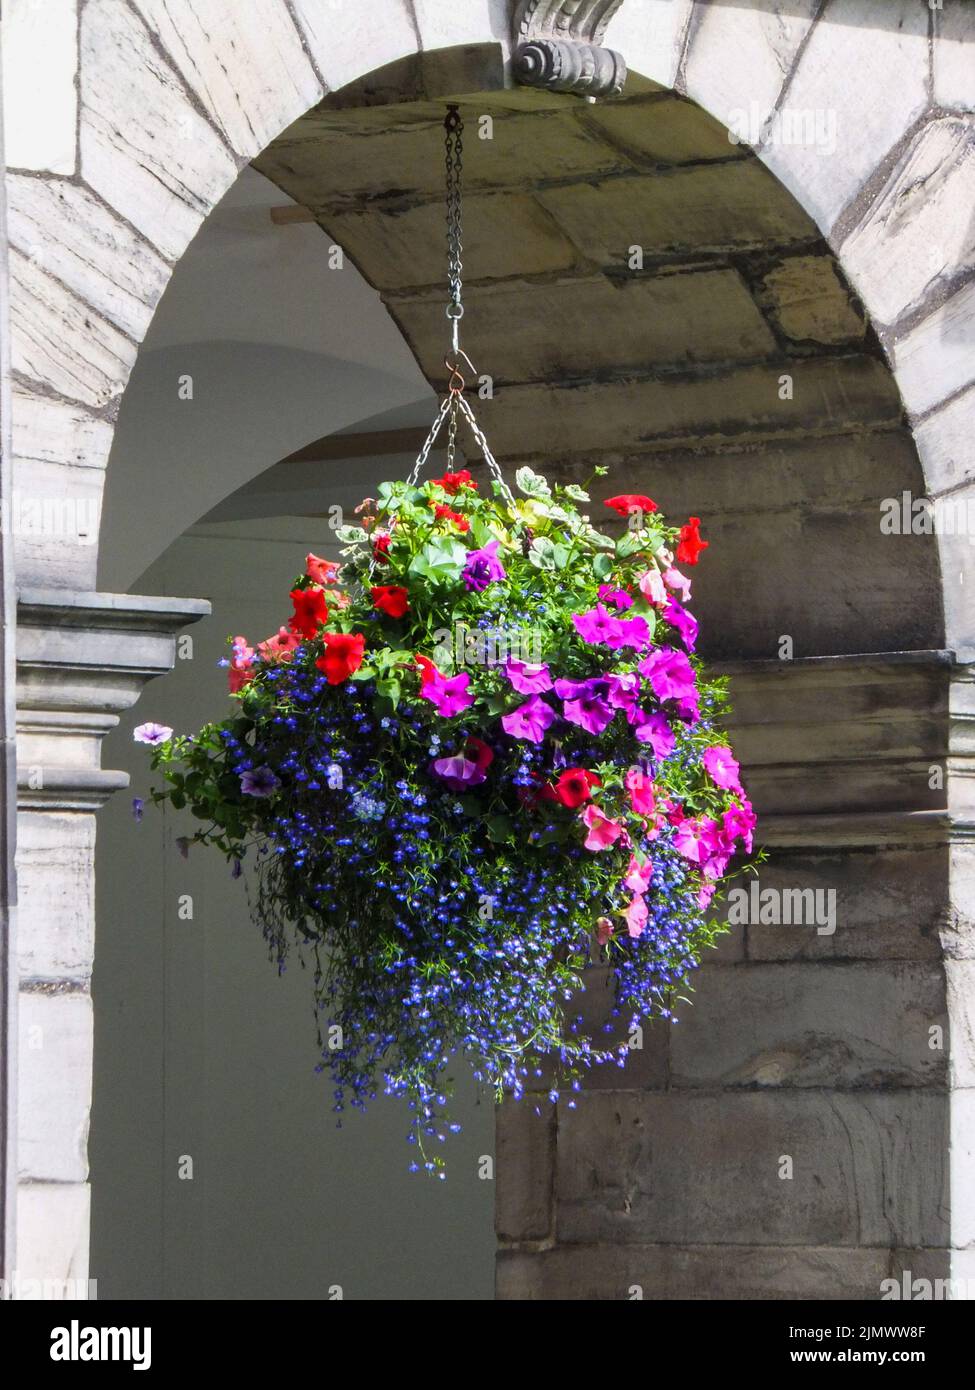 A basket of colorful petunias and lobelias hanging in an archway in Edinburgh, Lothian, Scotland, UK. Stock Photo